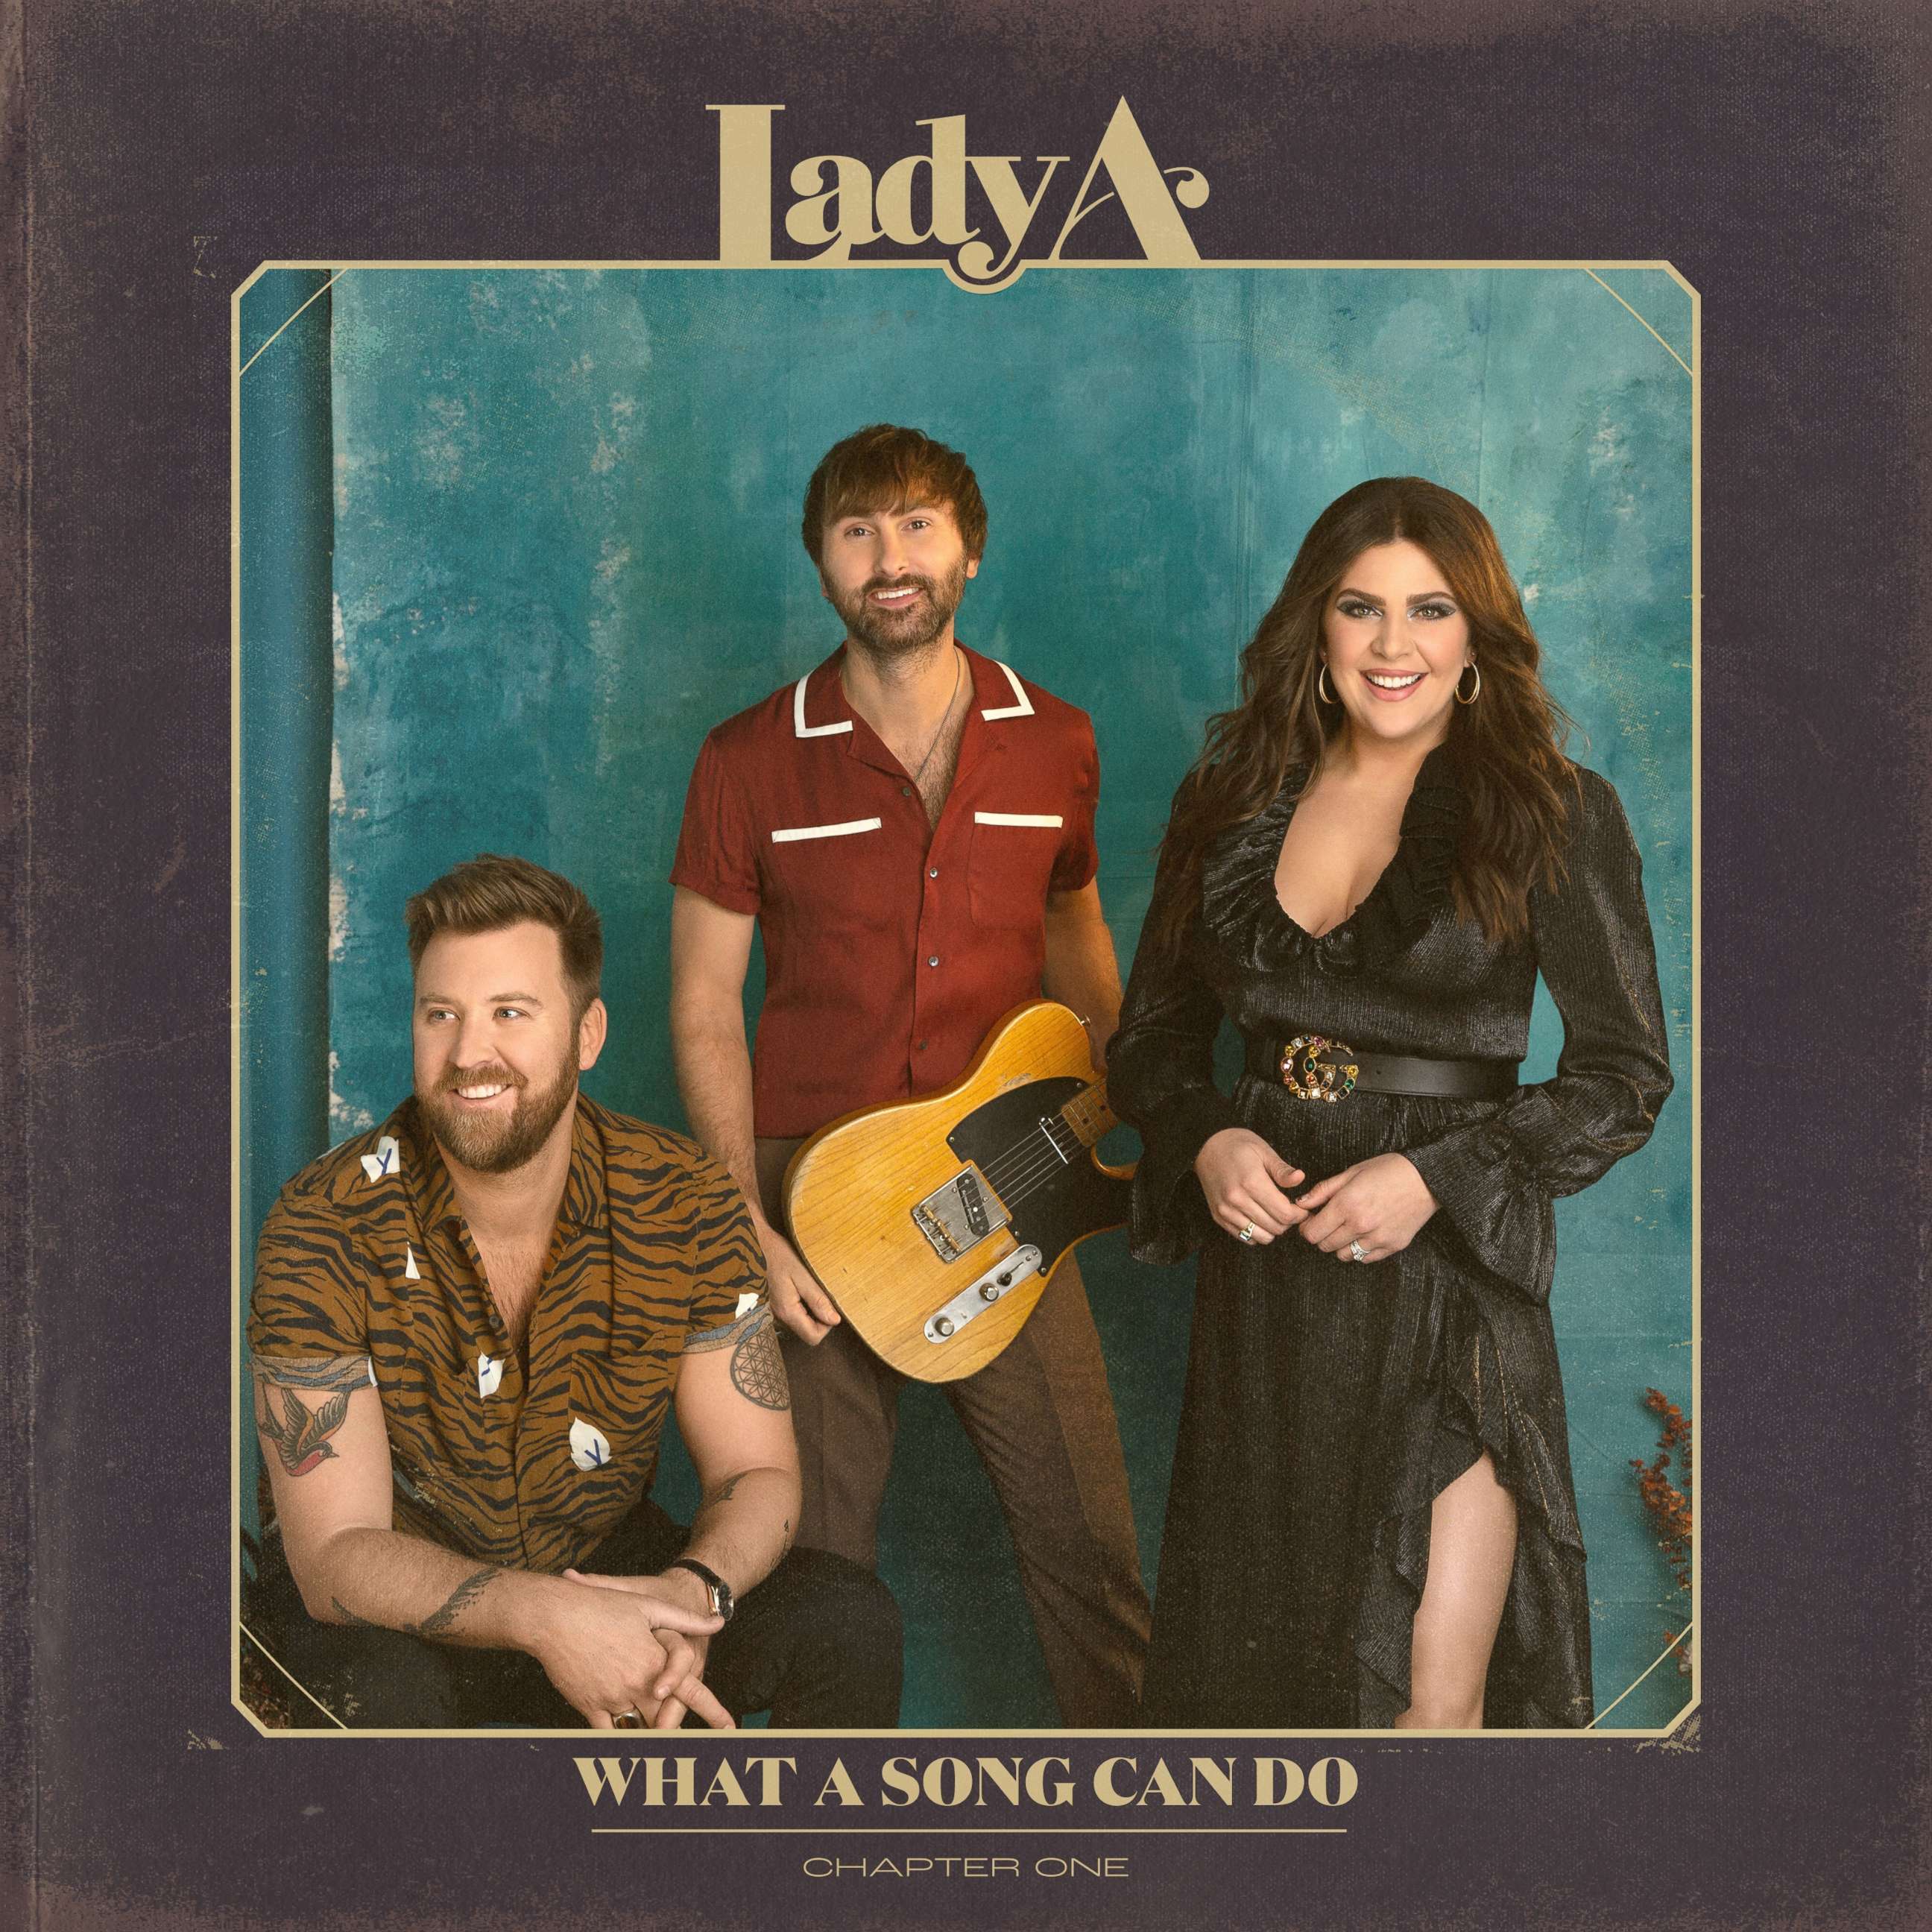 PHOTO: Lady A is releasing a new album titled "What a Song Can Do".